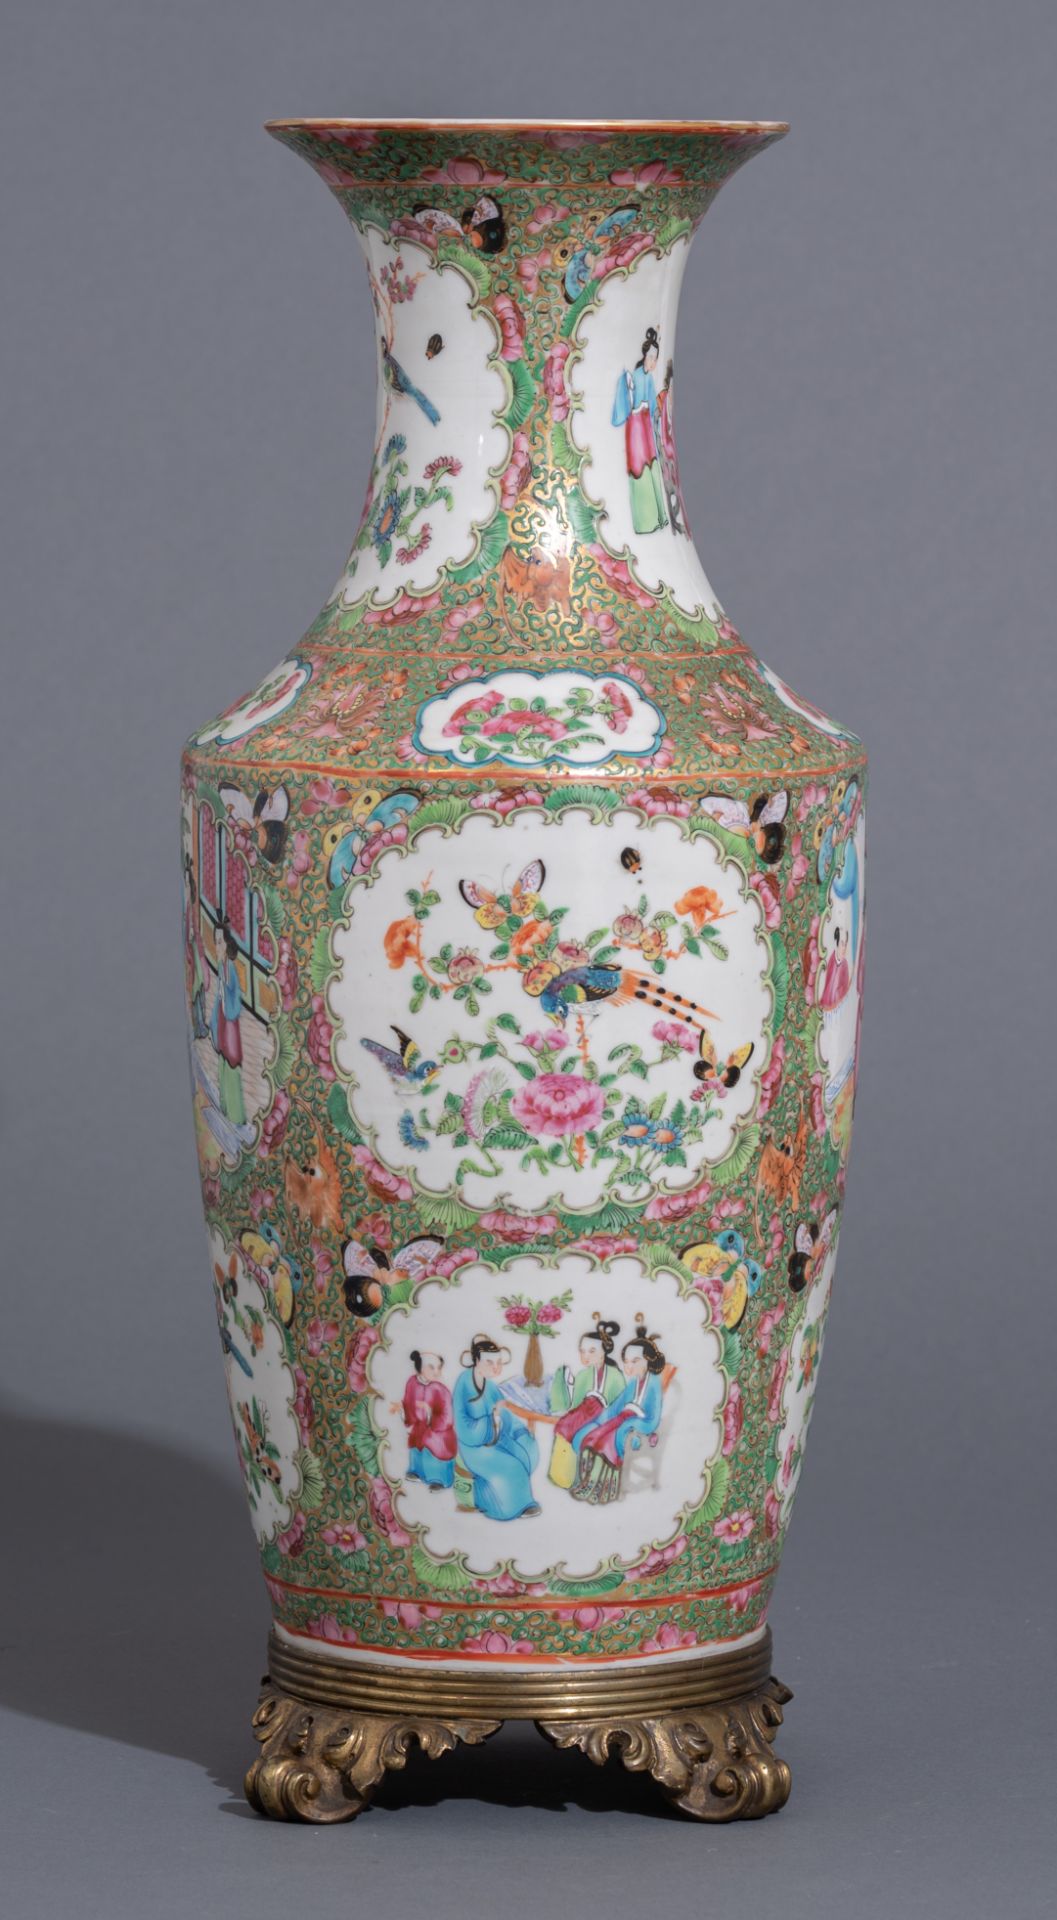 A collection of Chinese and Japanese porcelain items, 18th / 19th / 20thC, H 4 - 47 - ø 10,5 - 23 cm - Image 4 of 19